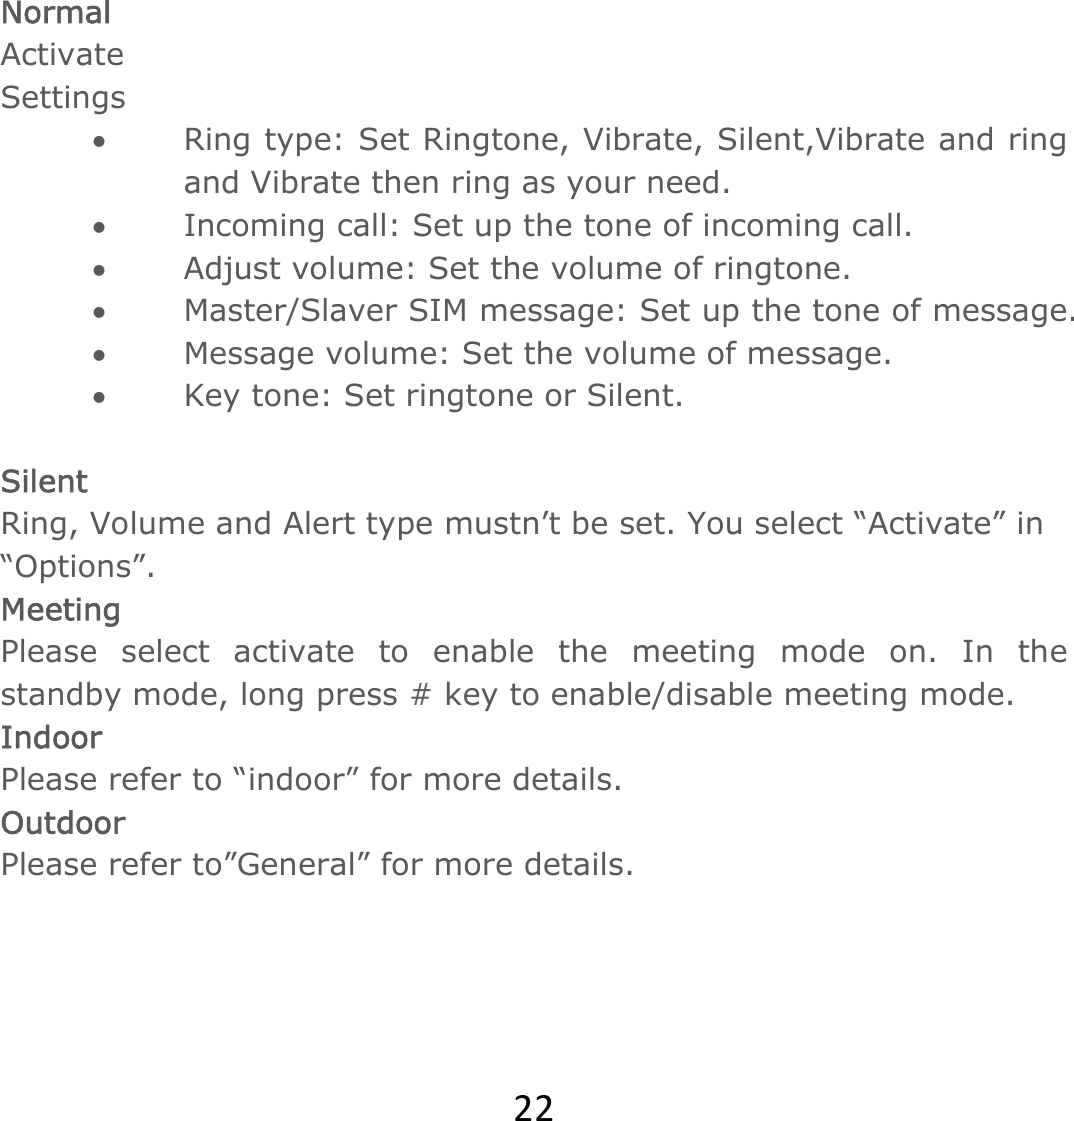 22 Normal Activate Settings • Ring type: Set Ringtone, Vibrate, Silent,Vibrate and ring and Vibrate then ring as your need.  • Incoming call: Set up the tone of incoming call. • Adjust volume: Set the volume of ringtone.  • Master/Slaver SIM message: Set up the tone of message. • Message volume: Set the volume of message. • Key tone: Set ringtone or Silent.  Silent  Ring, Volume and Alert type mustn’t be set. You select “Activate” in “Options”. Meeting Please select activate to enable the meeting mode on. In the standby mode, long press # key to enable/disable meeting mode. Indoor Please refer to “indoor” for more details. Outdoor  Please refer to”General” for more details.   